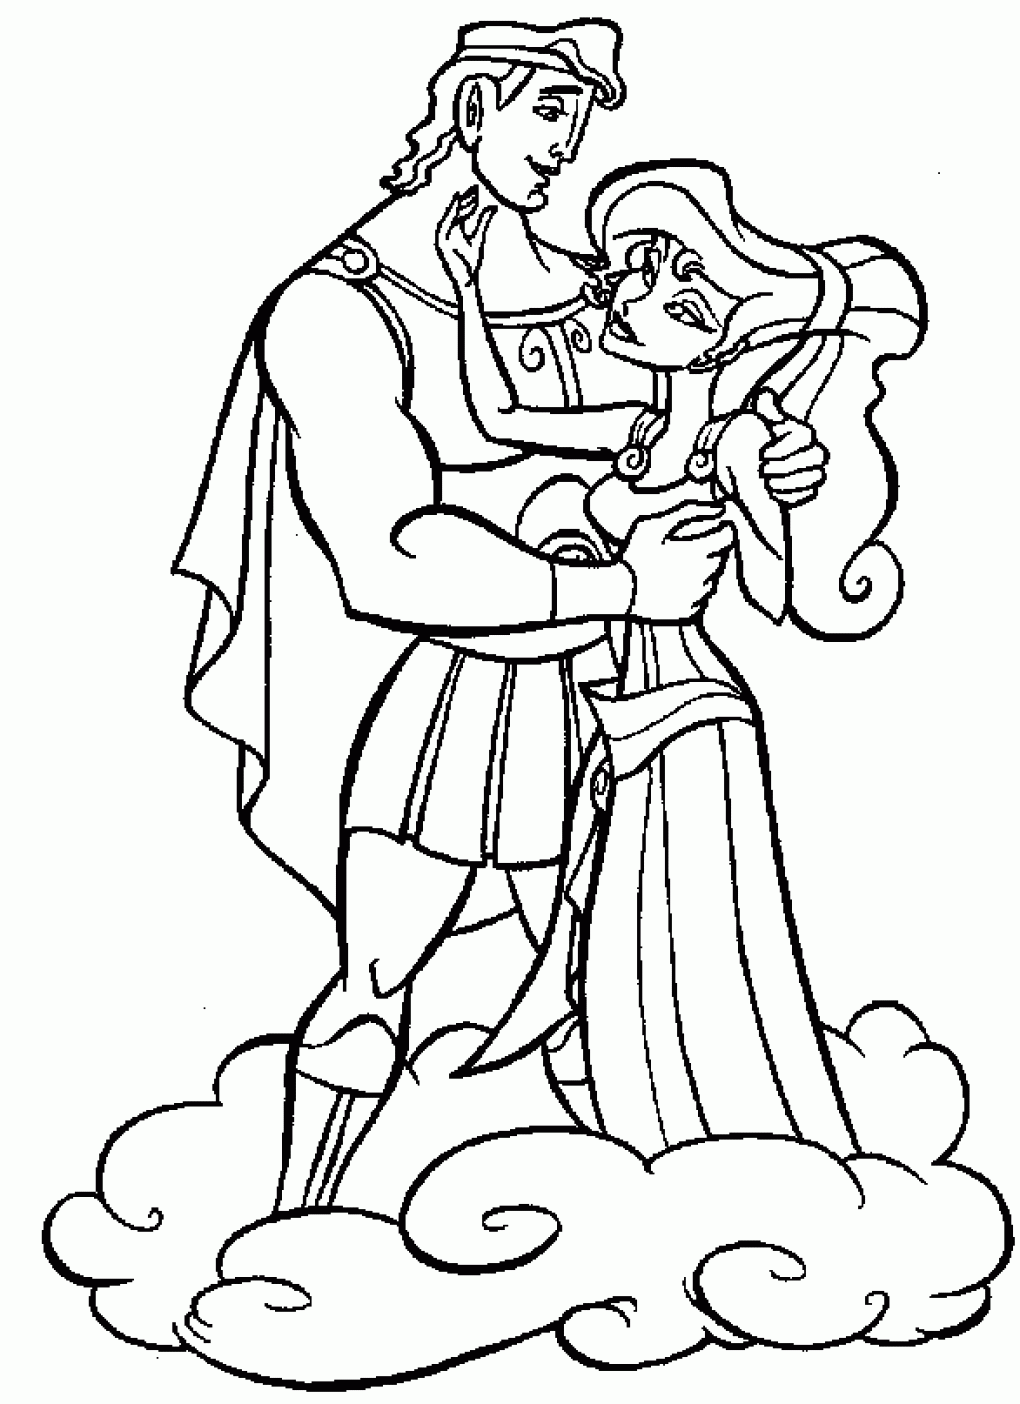 Free Printable Hercules Coloring Pages For Kids Coloring Wallpapers Download Free Images Wallpaper [coloring436.blogspot.com]